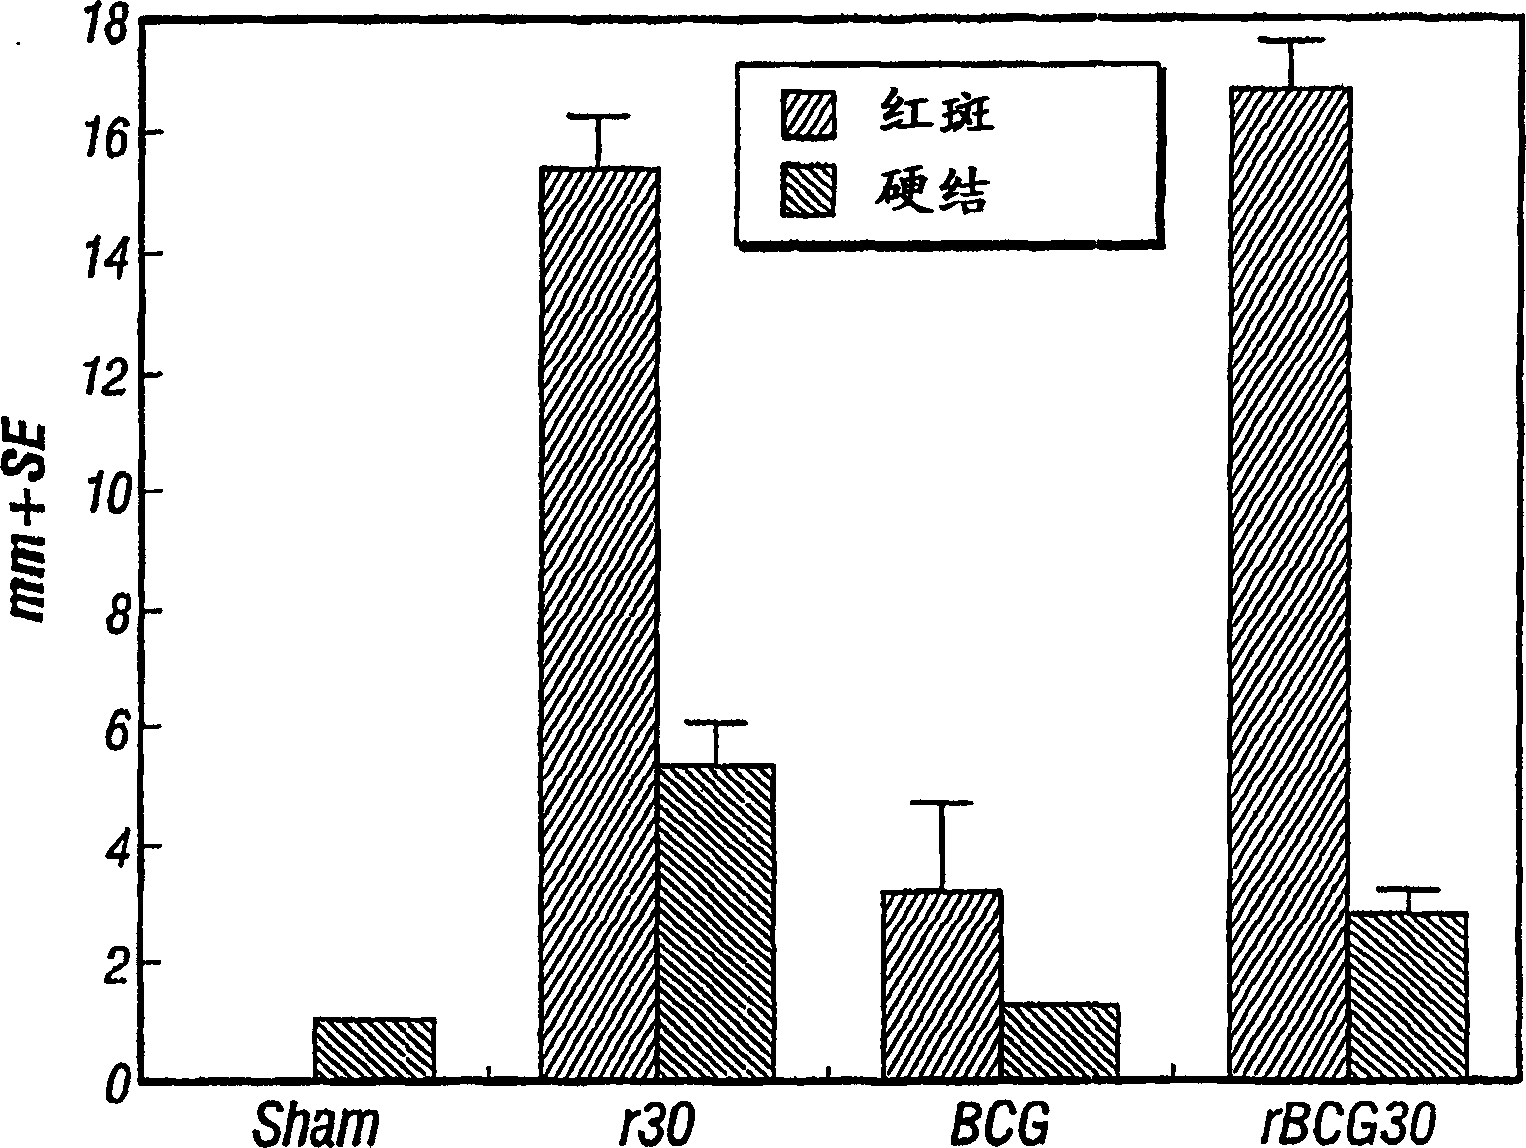 Recombinant intracellular pathogen vaccines and methods for use